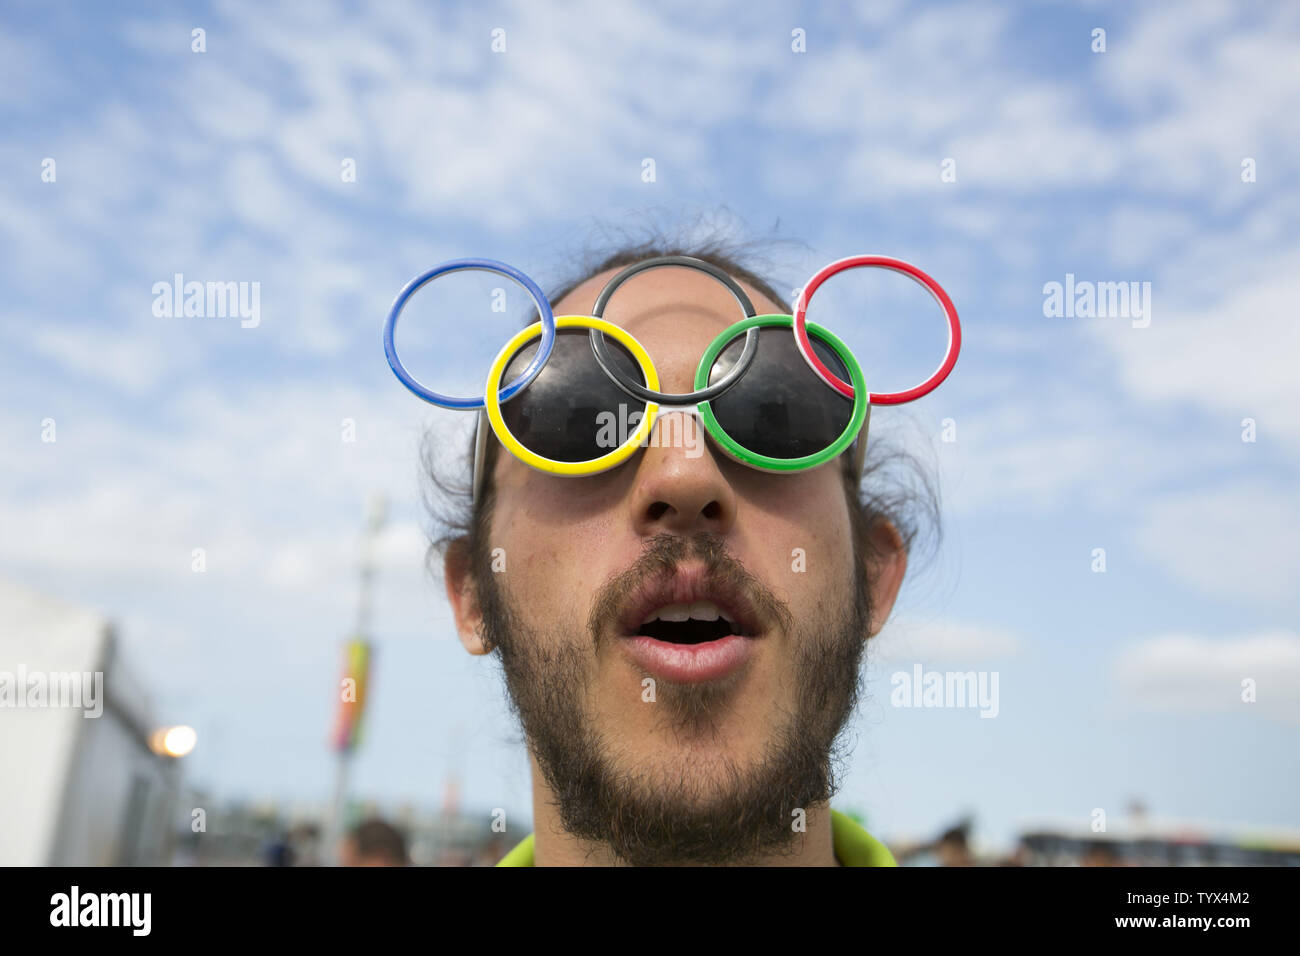 An Olympic volunteer wears Olympic ring sunglasses while guiding members of  the press through a security checkpoint at Olympic Park in Rio de Janeiro,  Brazil on August 4, 2016. The opening ceremonies